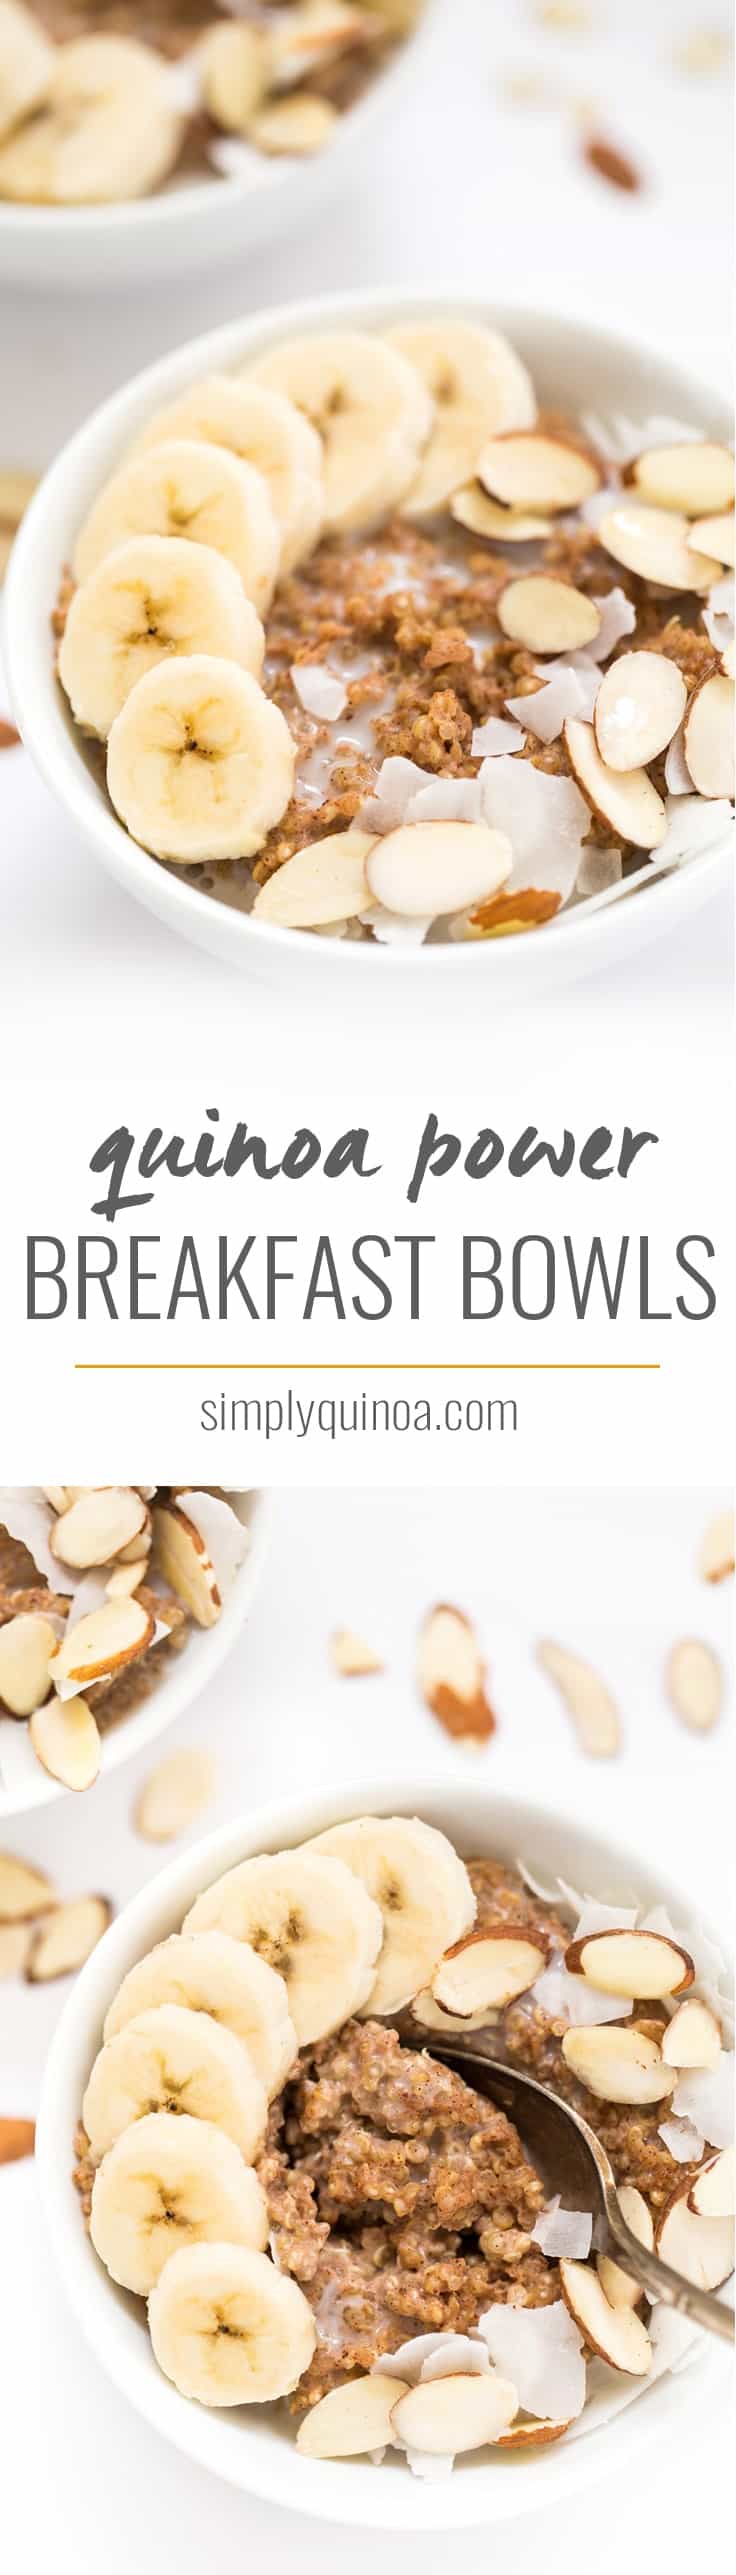 Kick start your day with these delicious QUINOA POWER BREAKFAST BOWLS! They're a cinch to make, are packed with protein and will keep you energized all day long!